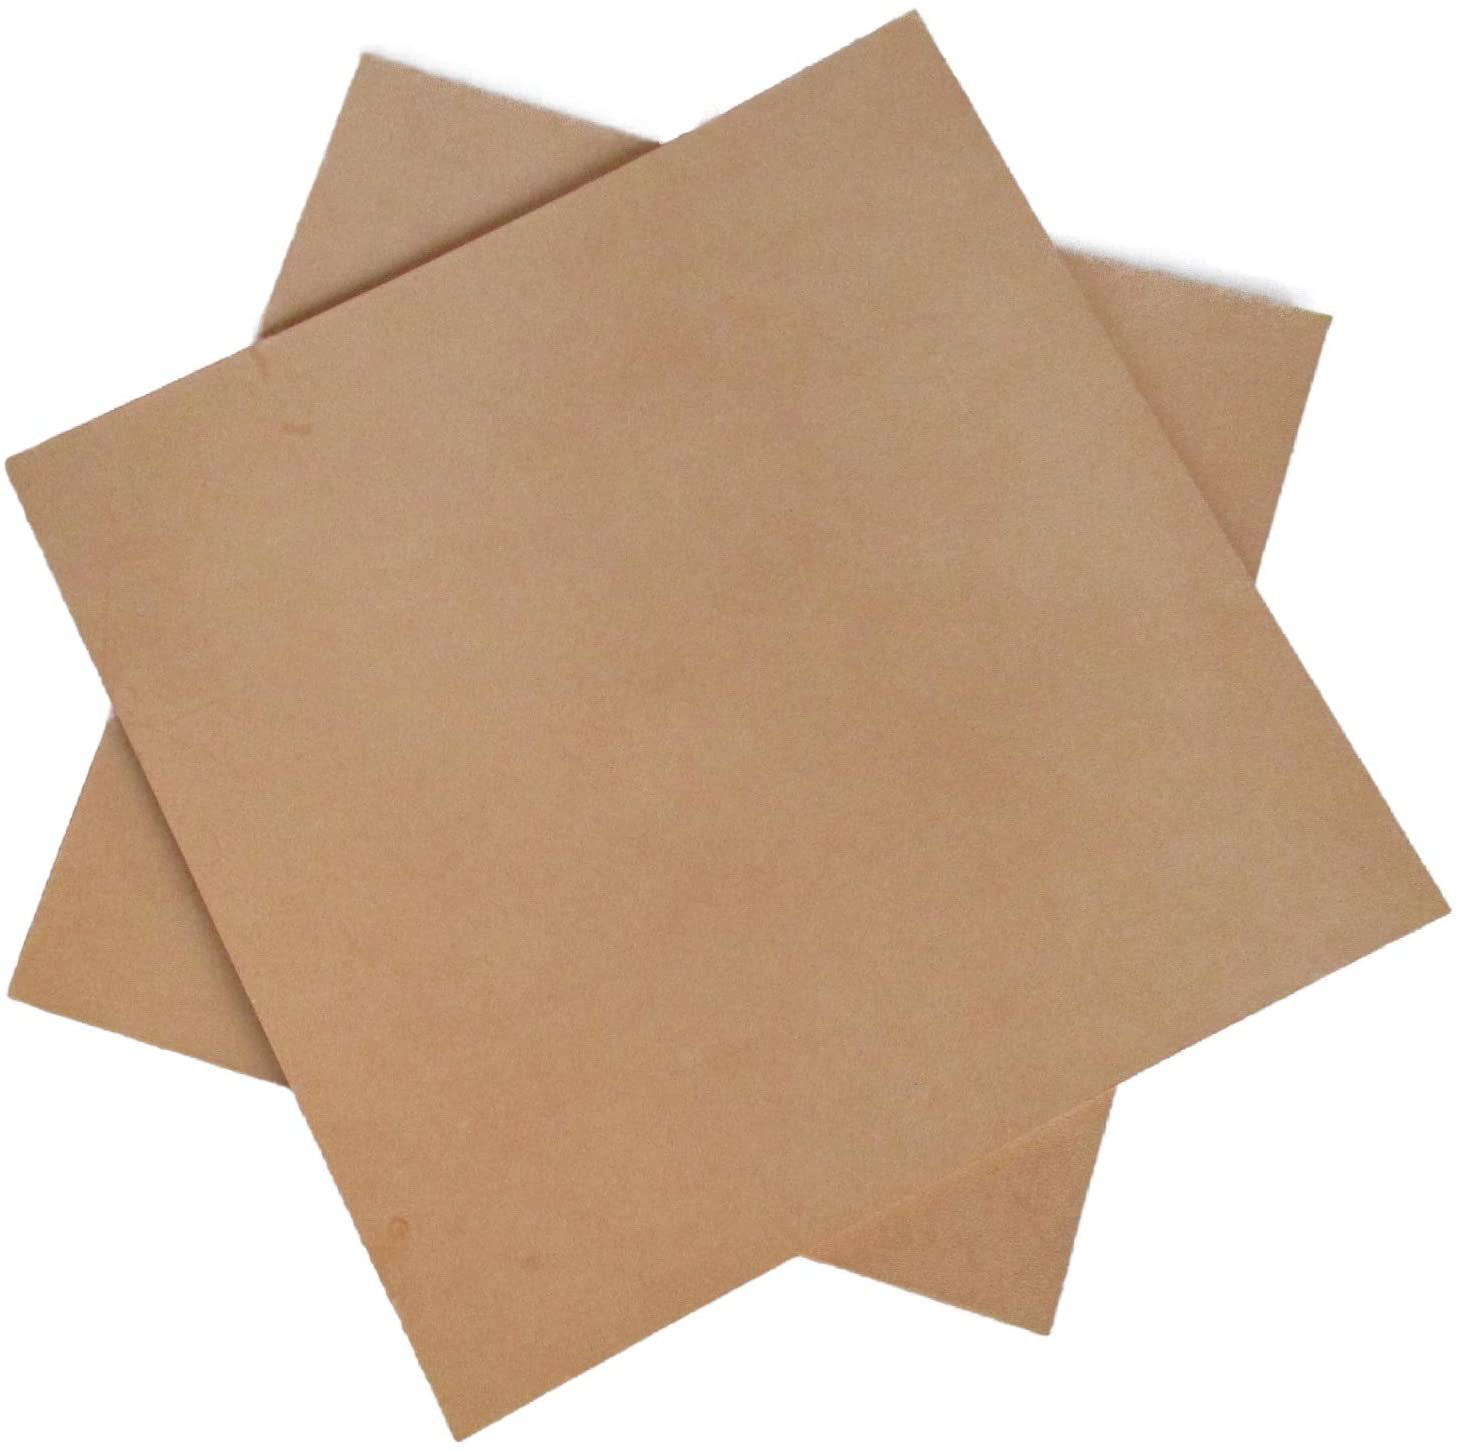 9-10 oz Precut Pieces Veg Tanned Tooling Leather Leathercraft Cowhide 